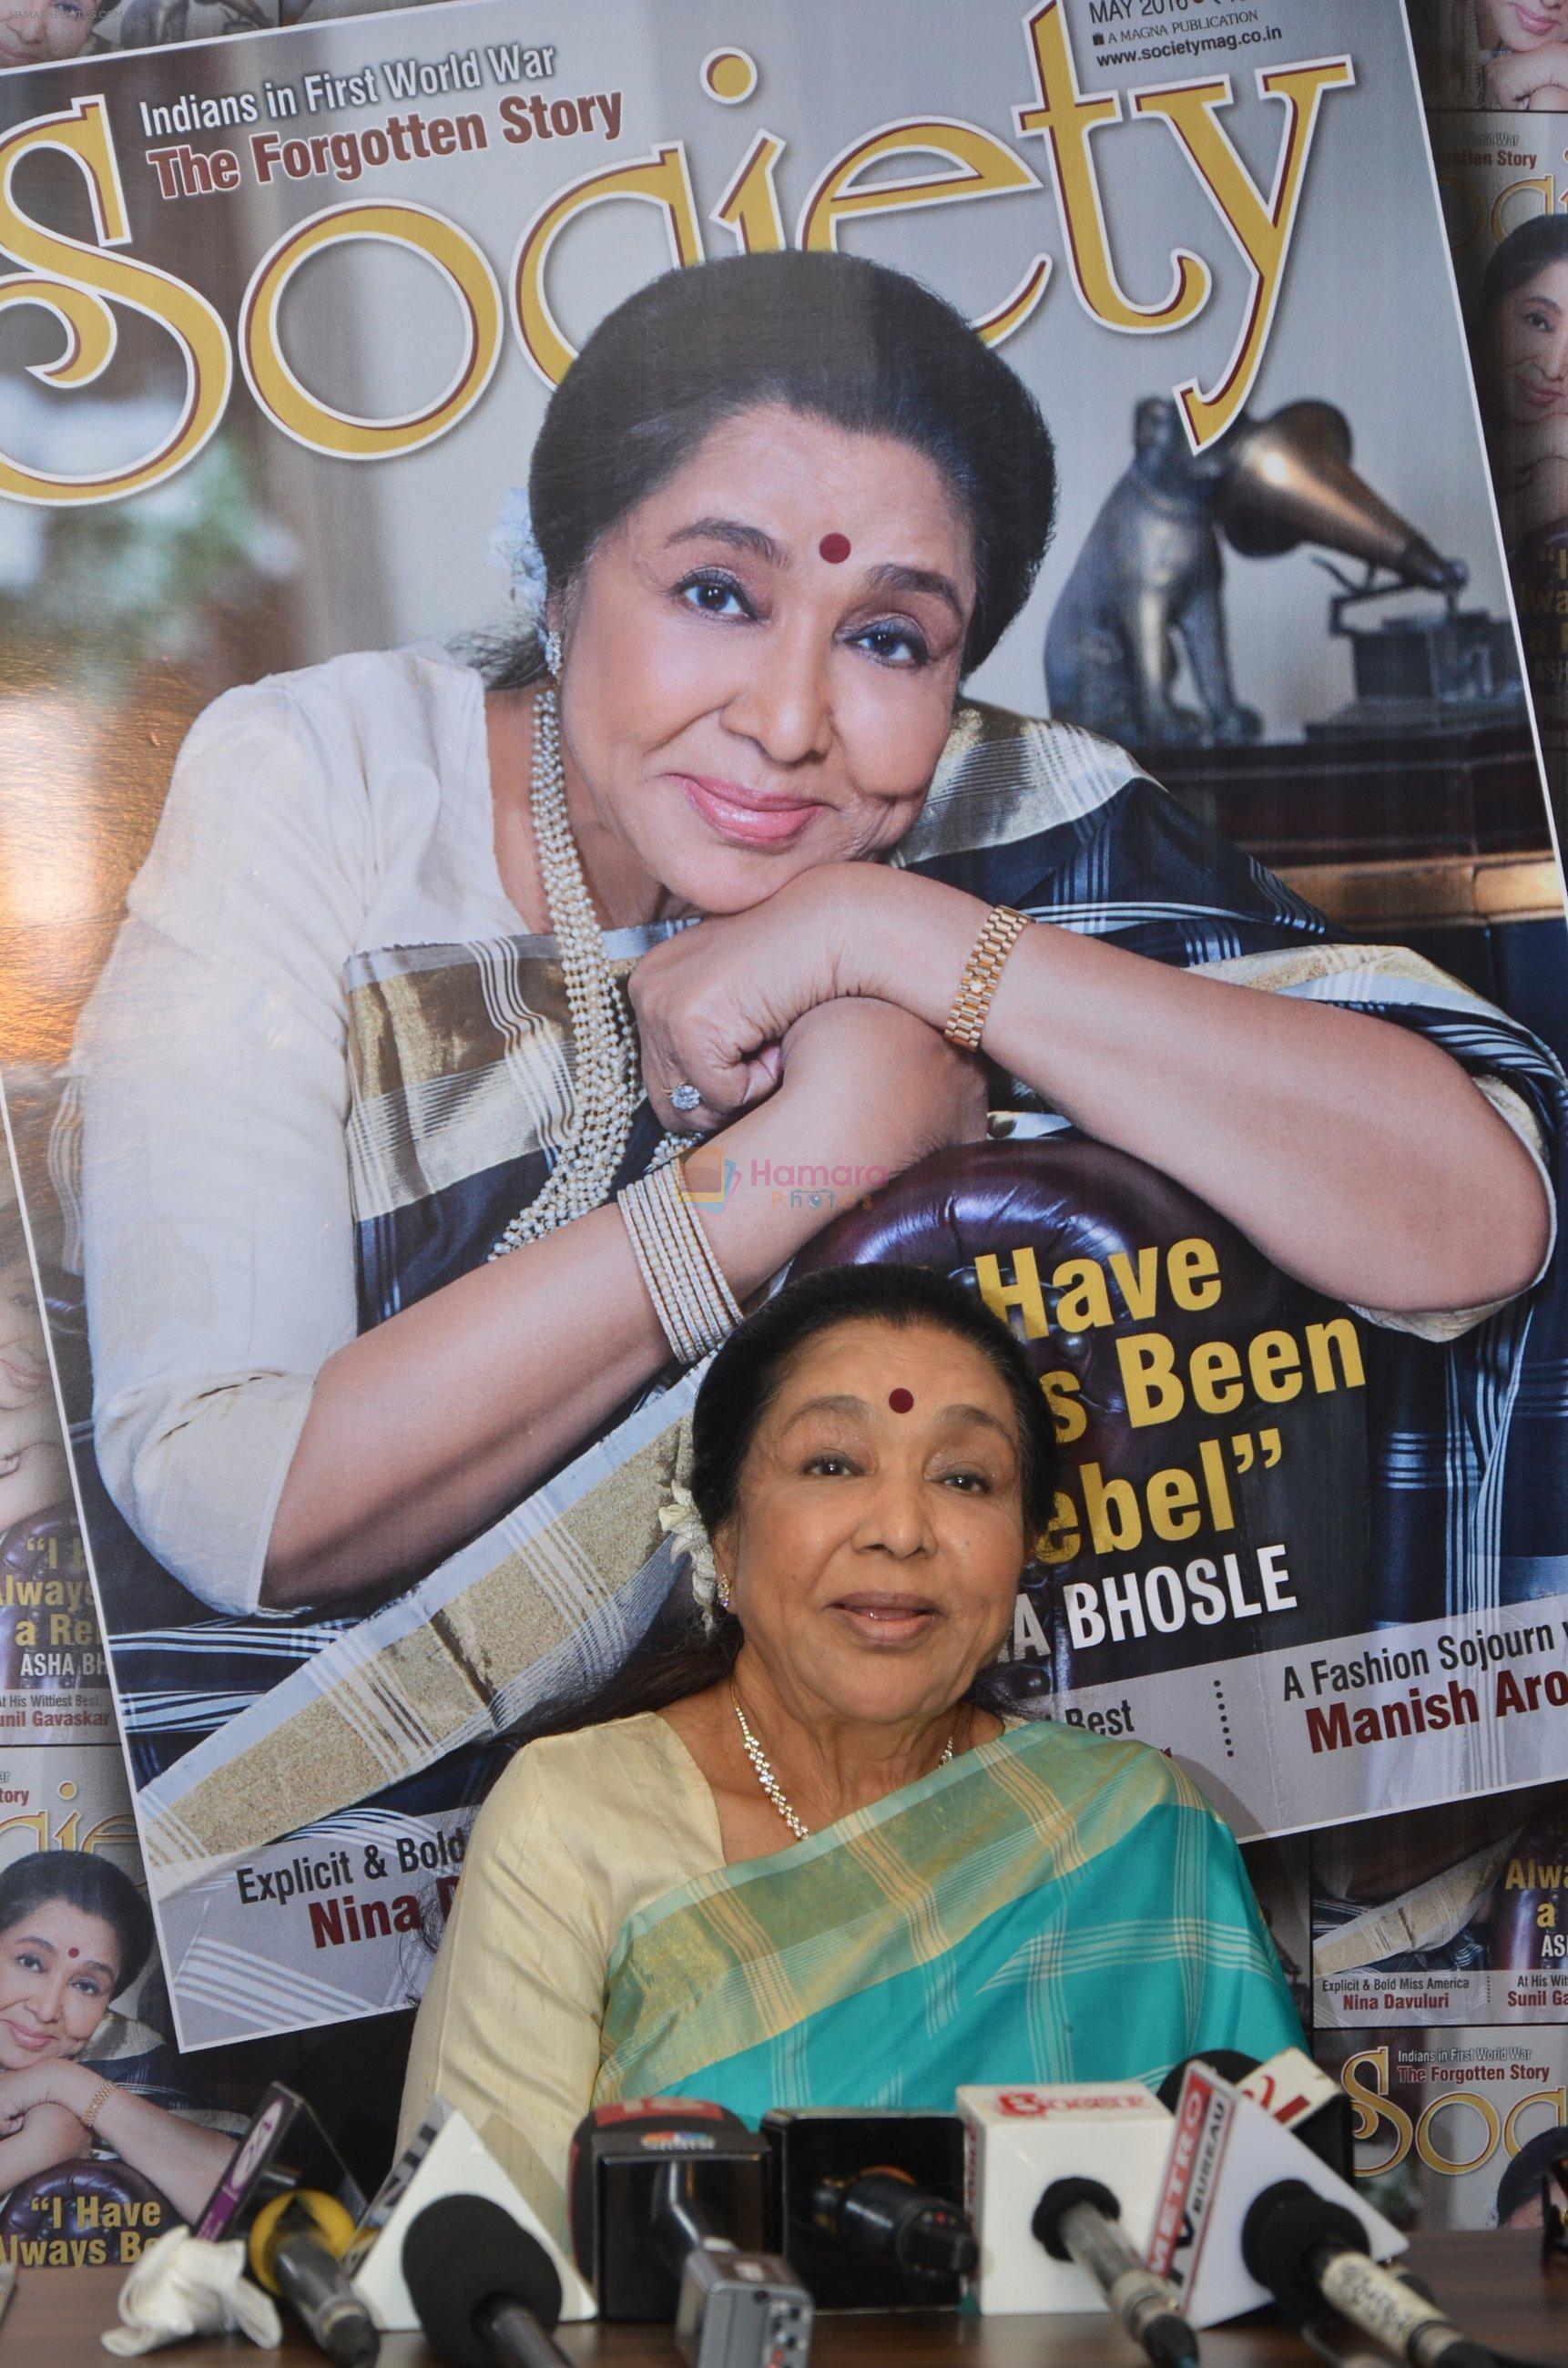 Asha Bhosle announced her farewell tour in uk at magnahouse on 5th May 2016